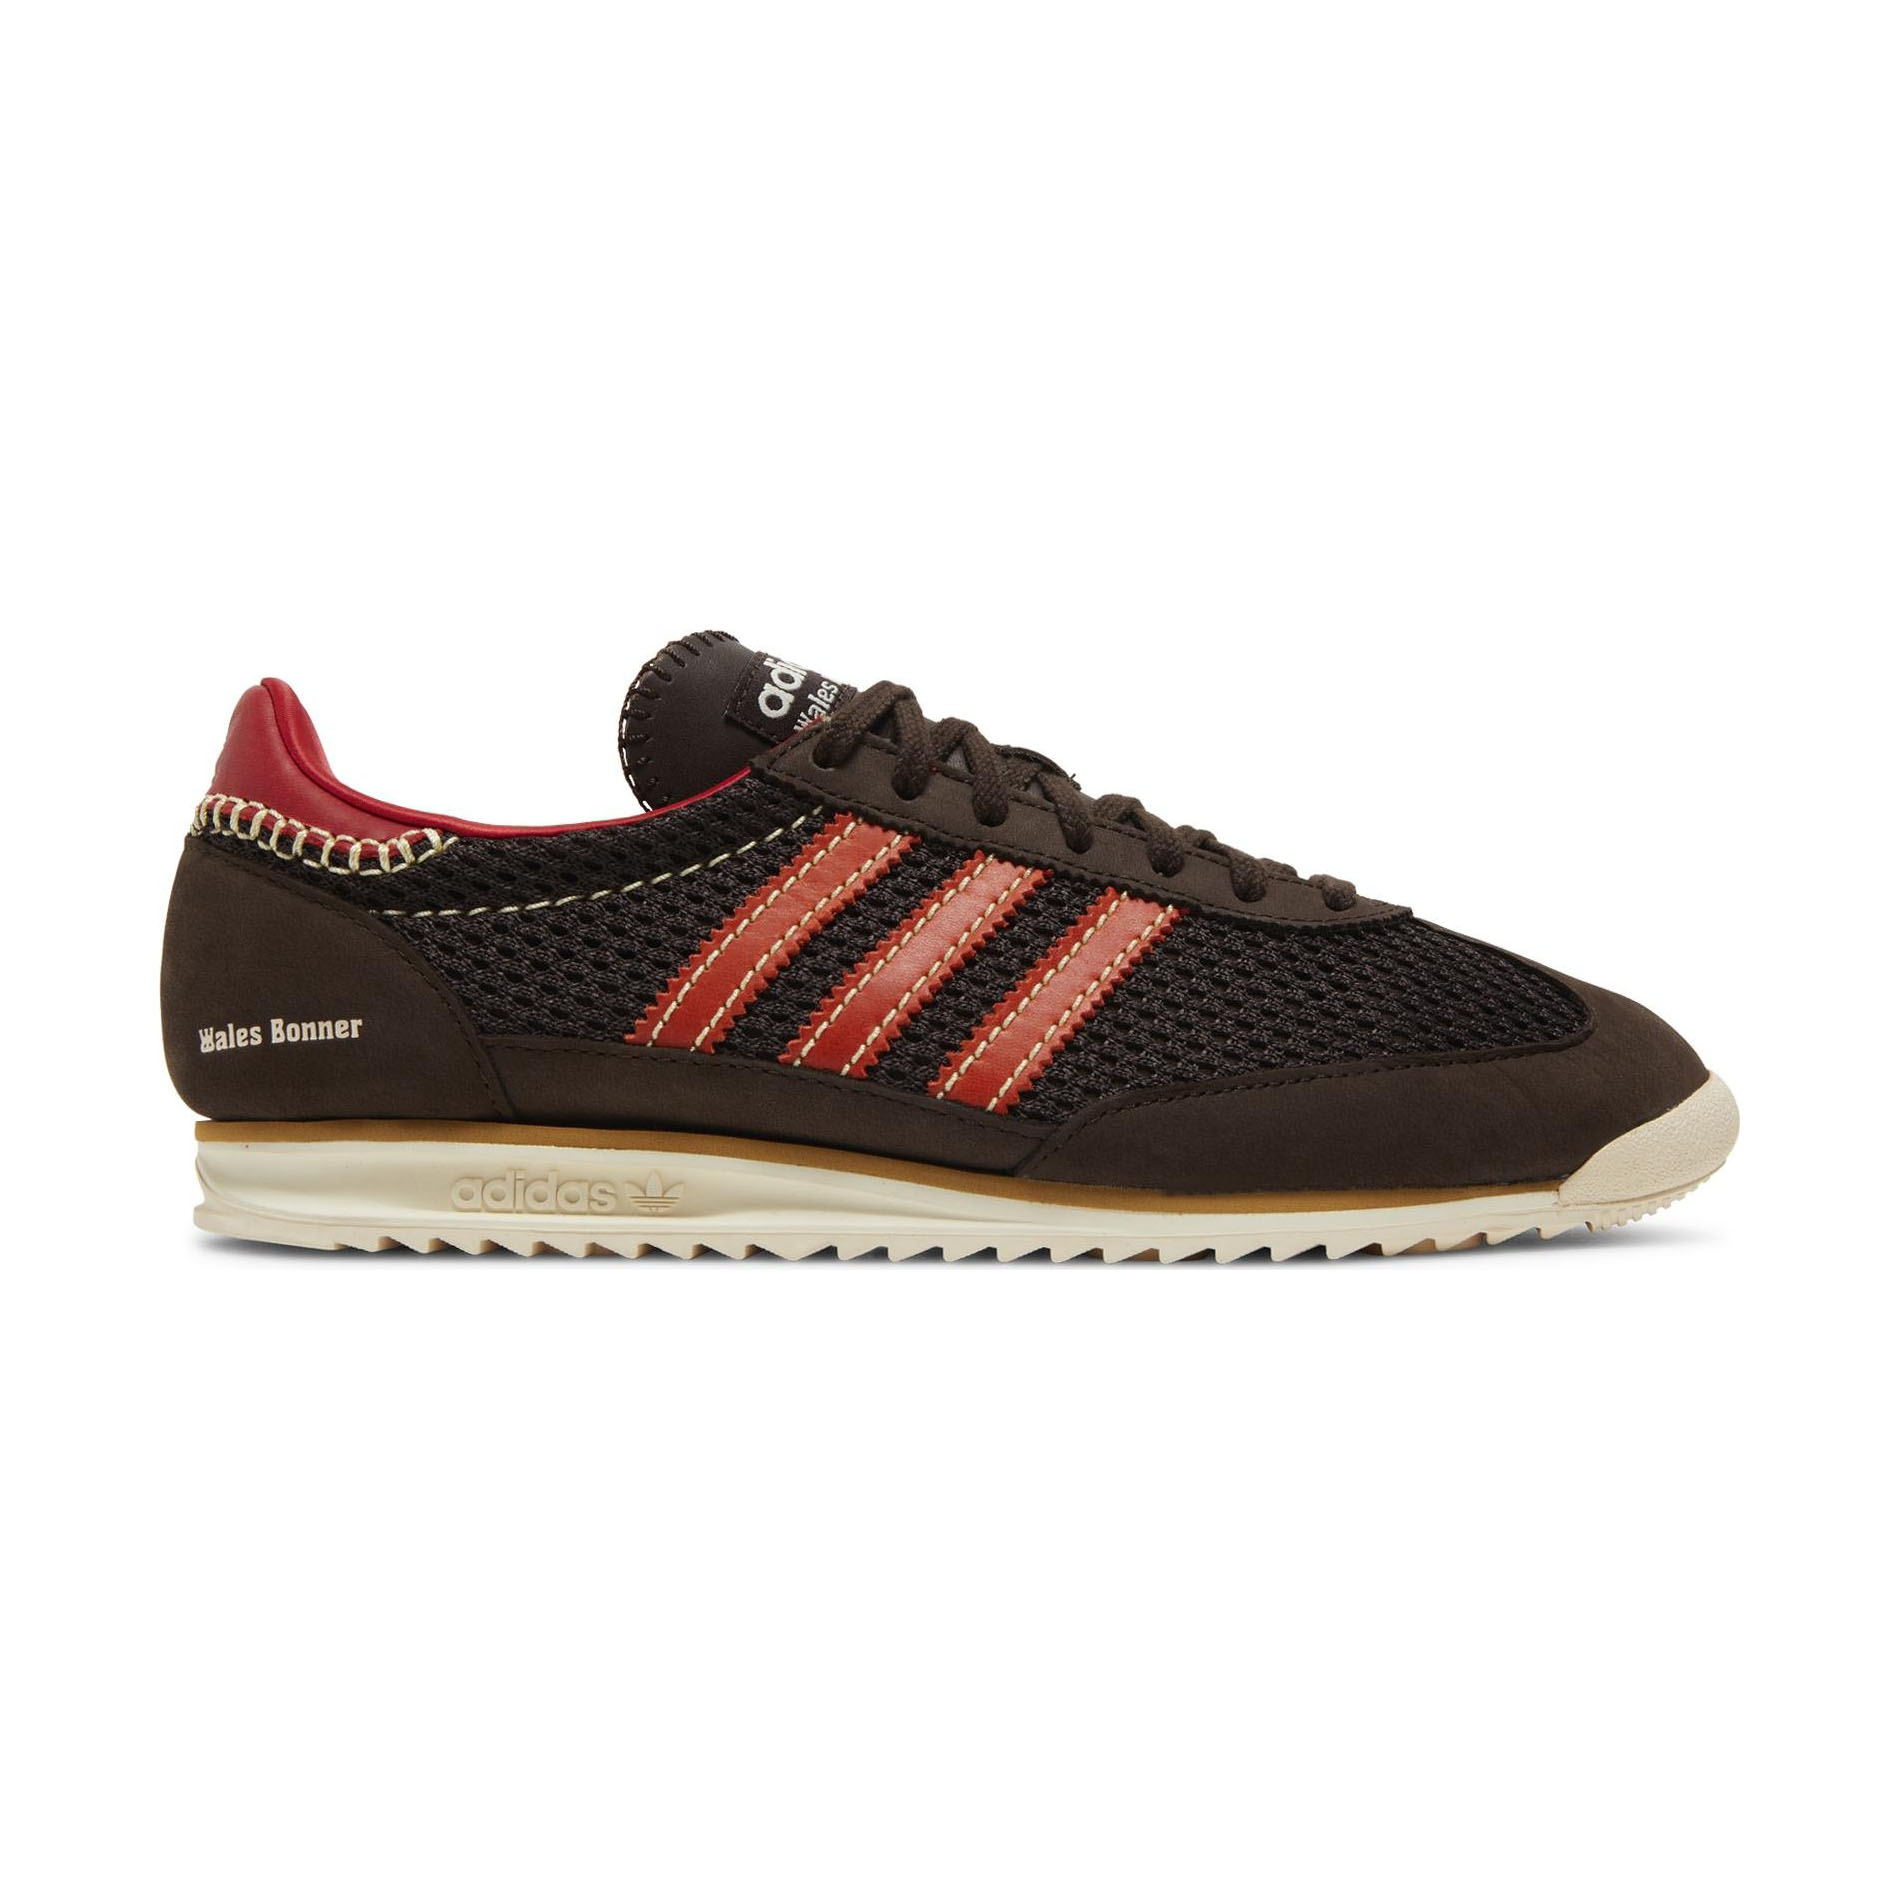 Wales Bonner x Adidas, SL72 Knit in Brown